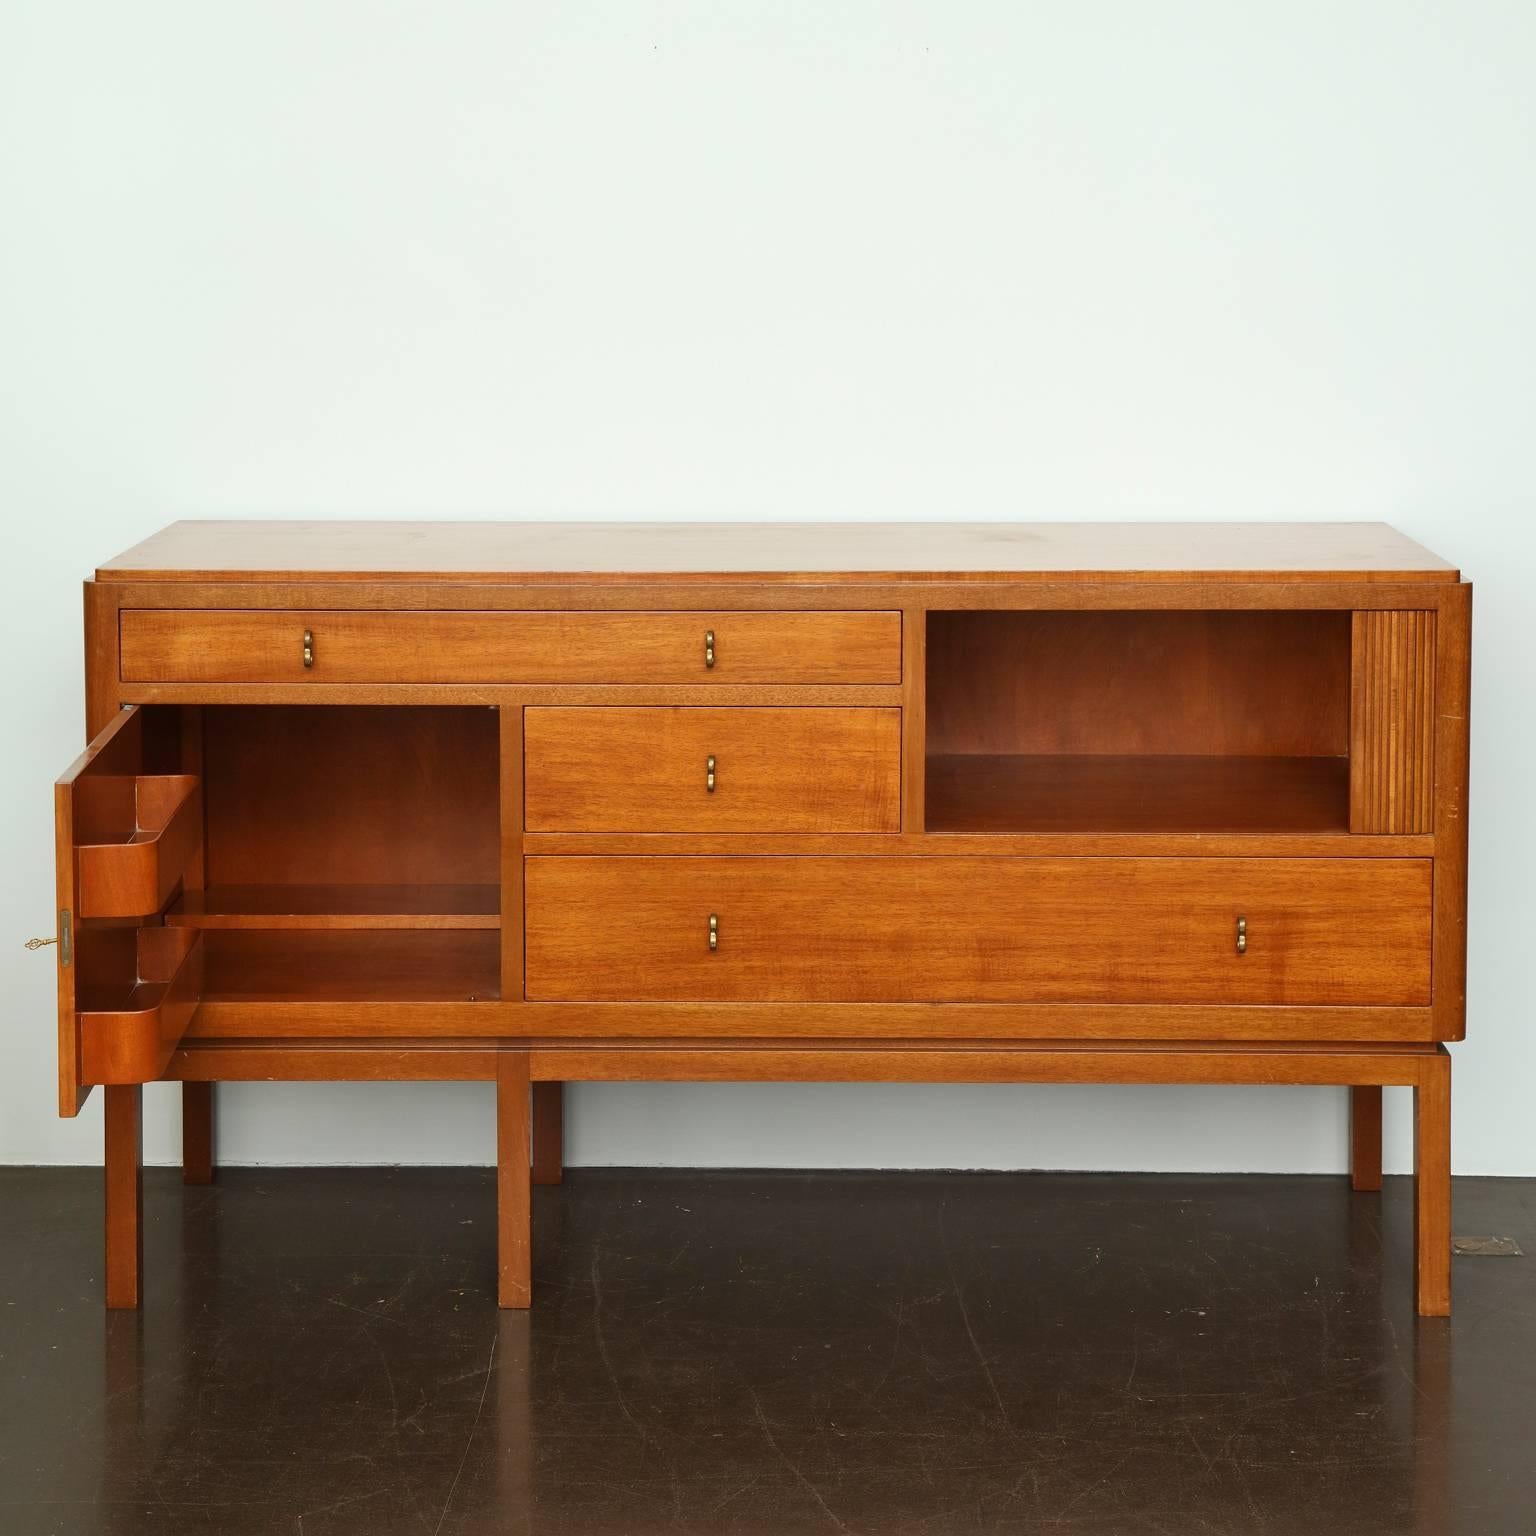 Edward Wormley (1907-1995).
Three-drawer walnut cabinet with one door and tambour front and brass pulls. Raised on six square legs. Signed with Dunbar label.
Executed by Dunbar, American, circa 1950.

This Mid-Century Modern chest would make an